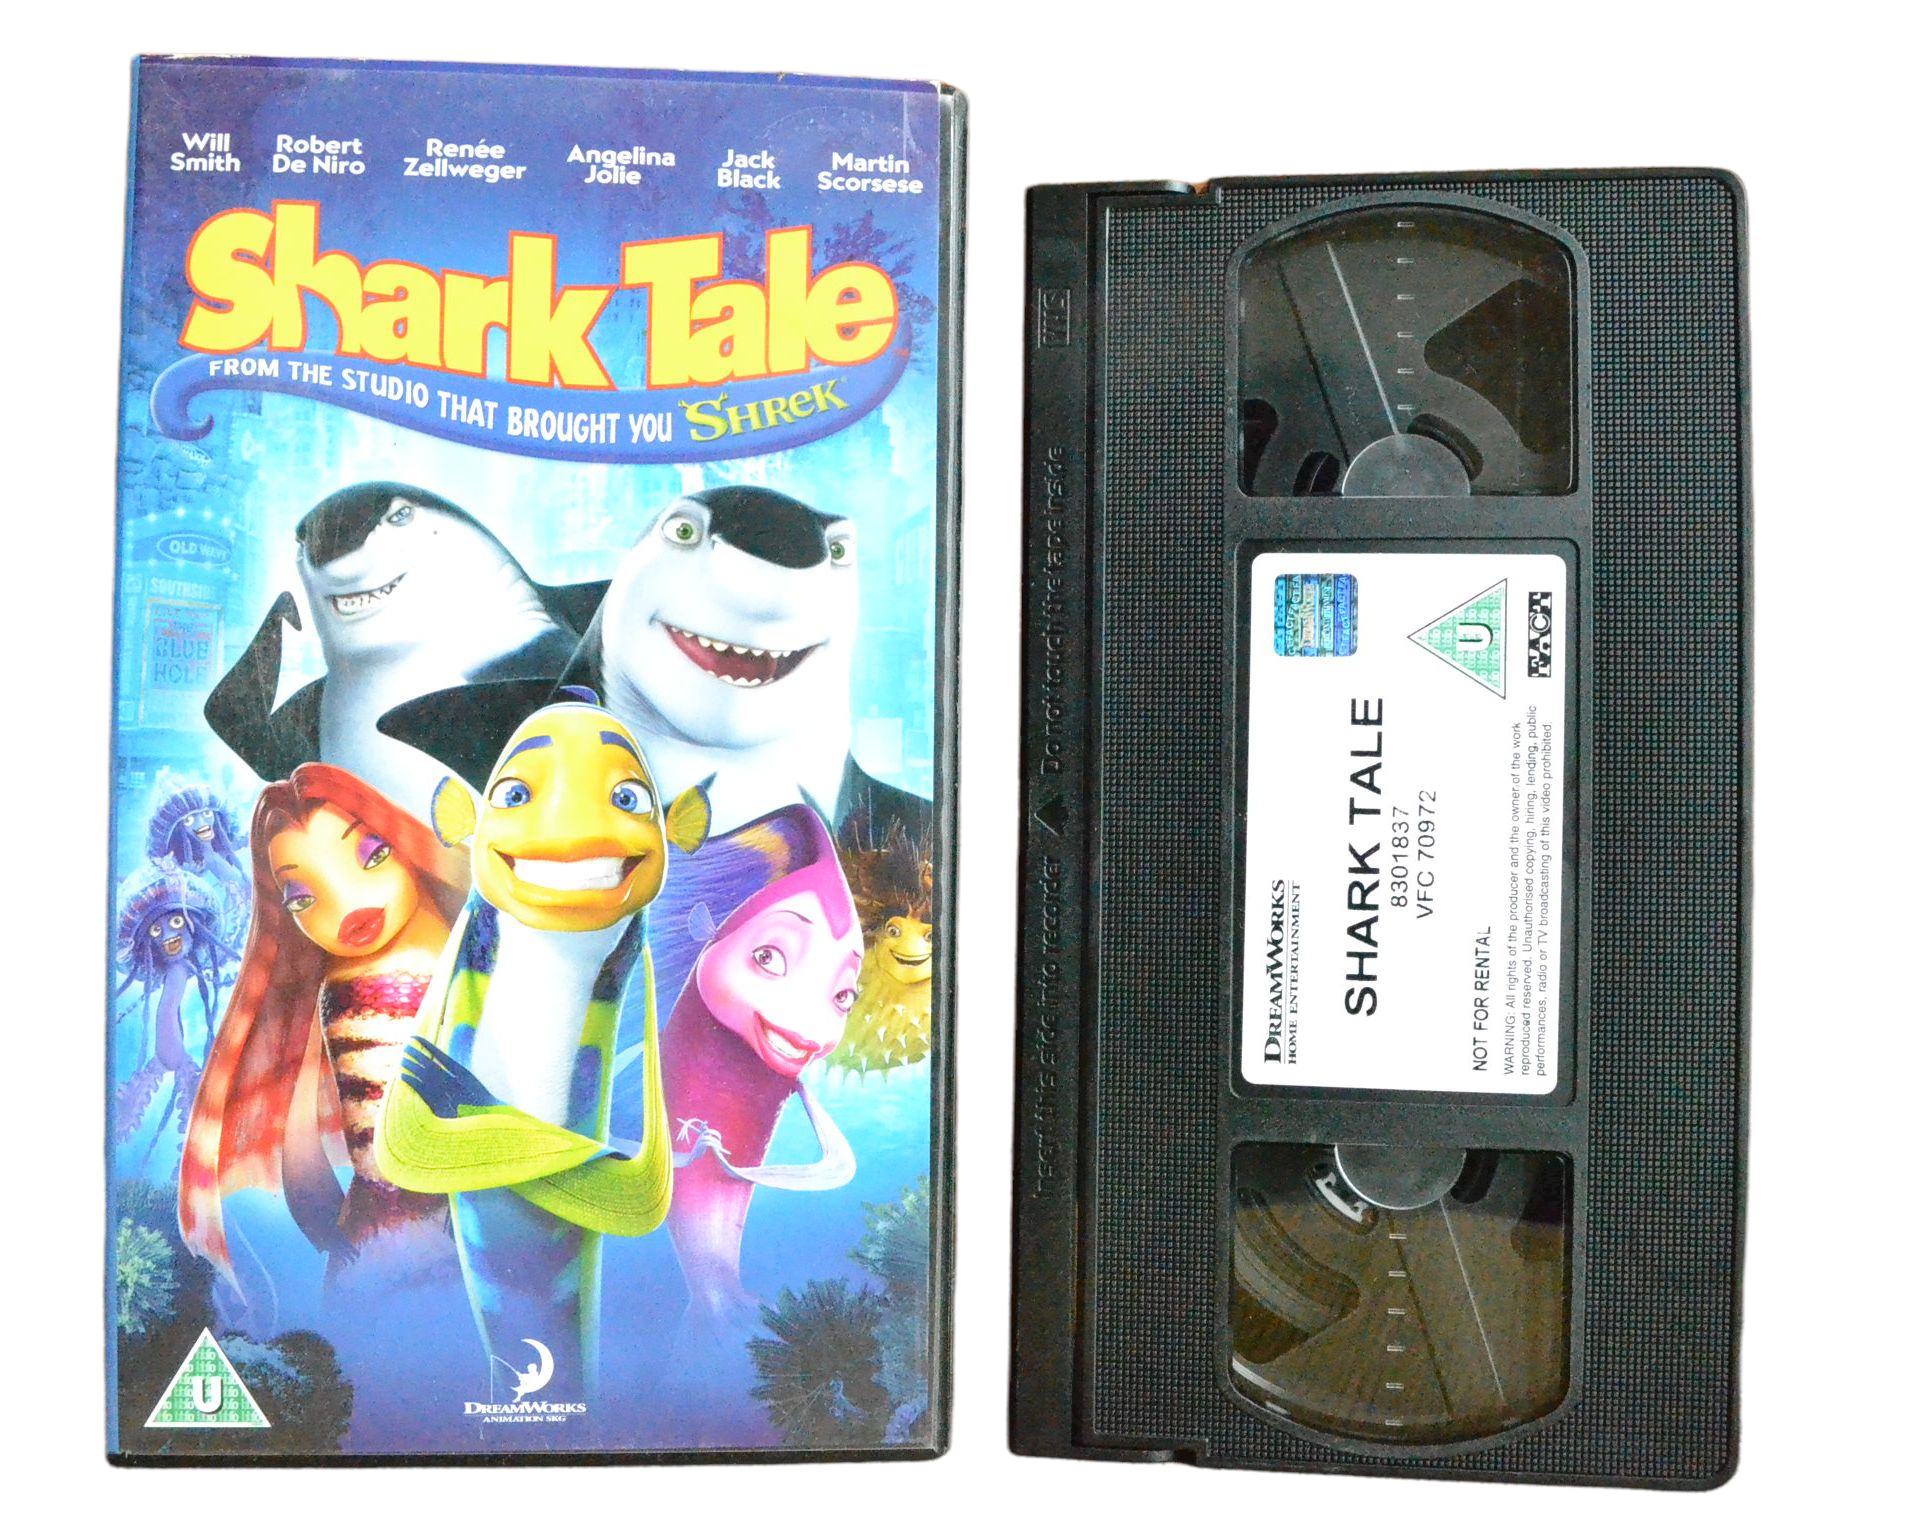 Shark Tale - Will Smith - Dream Works Home Entertainment - Children’s - Pal VHS-